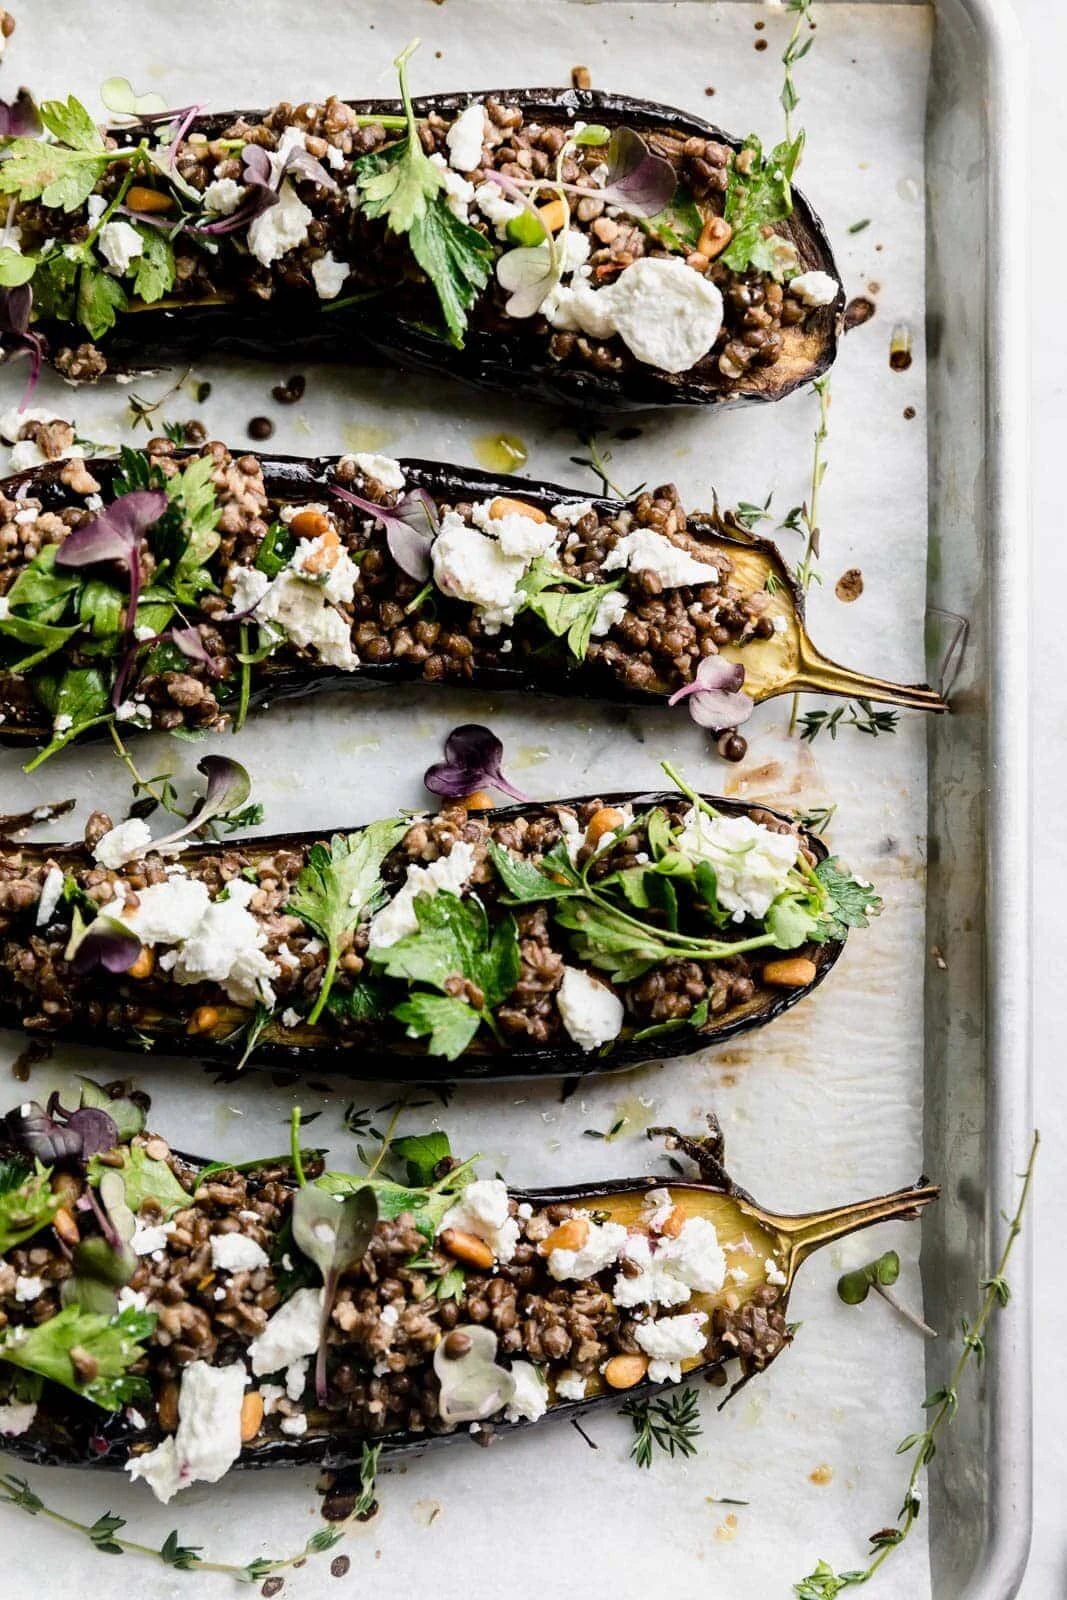 40 Hot Lunch Ideas - Ahead of Thyme